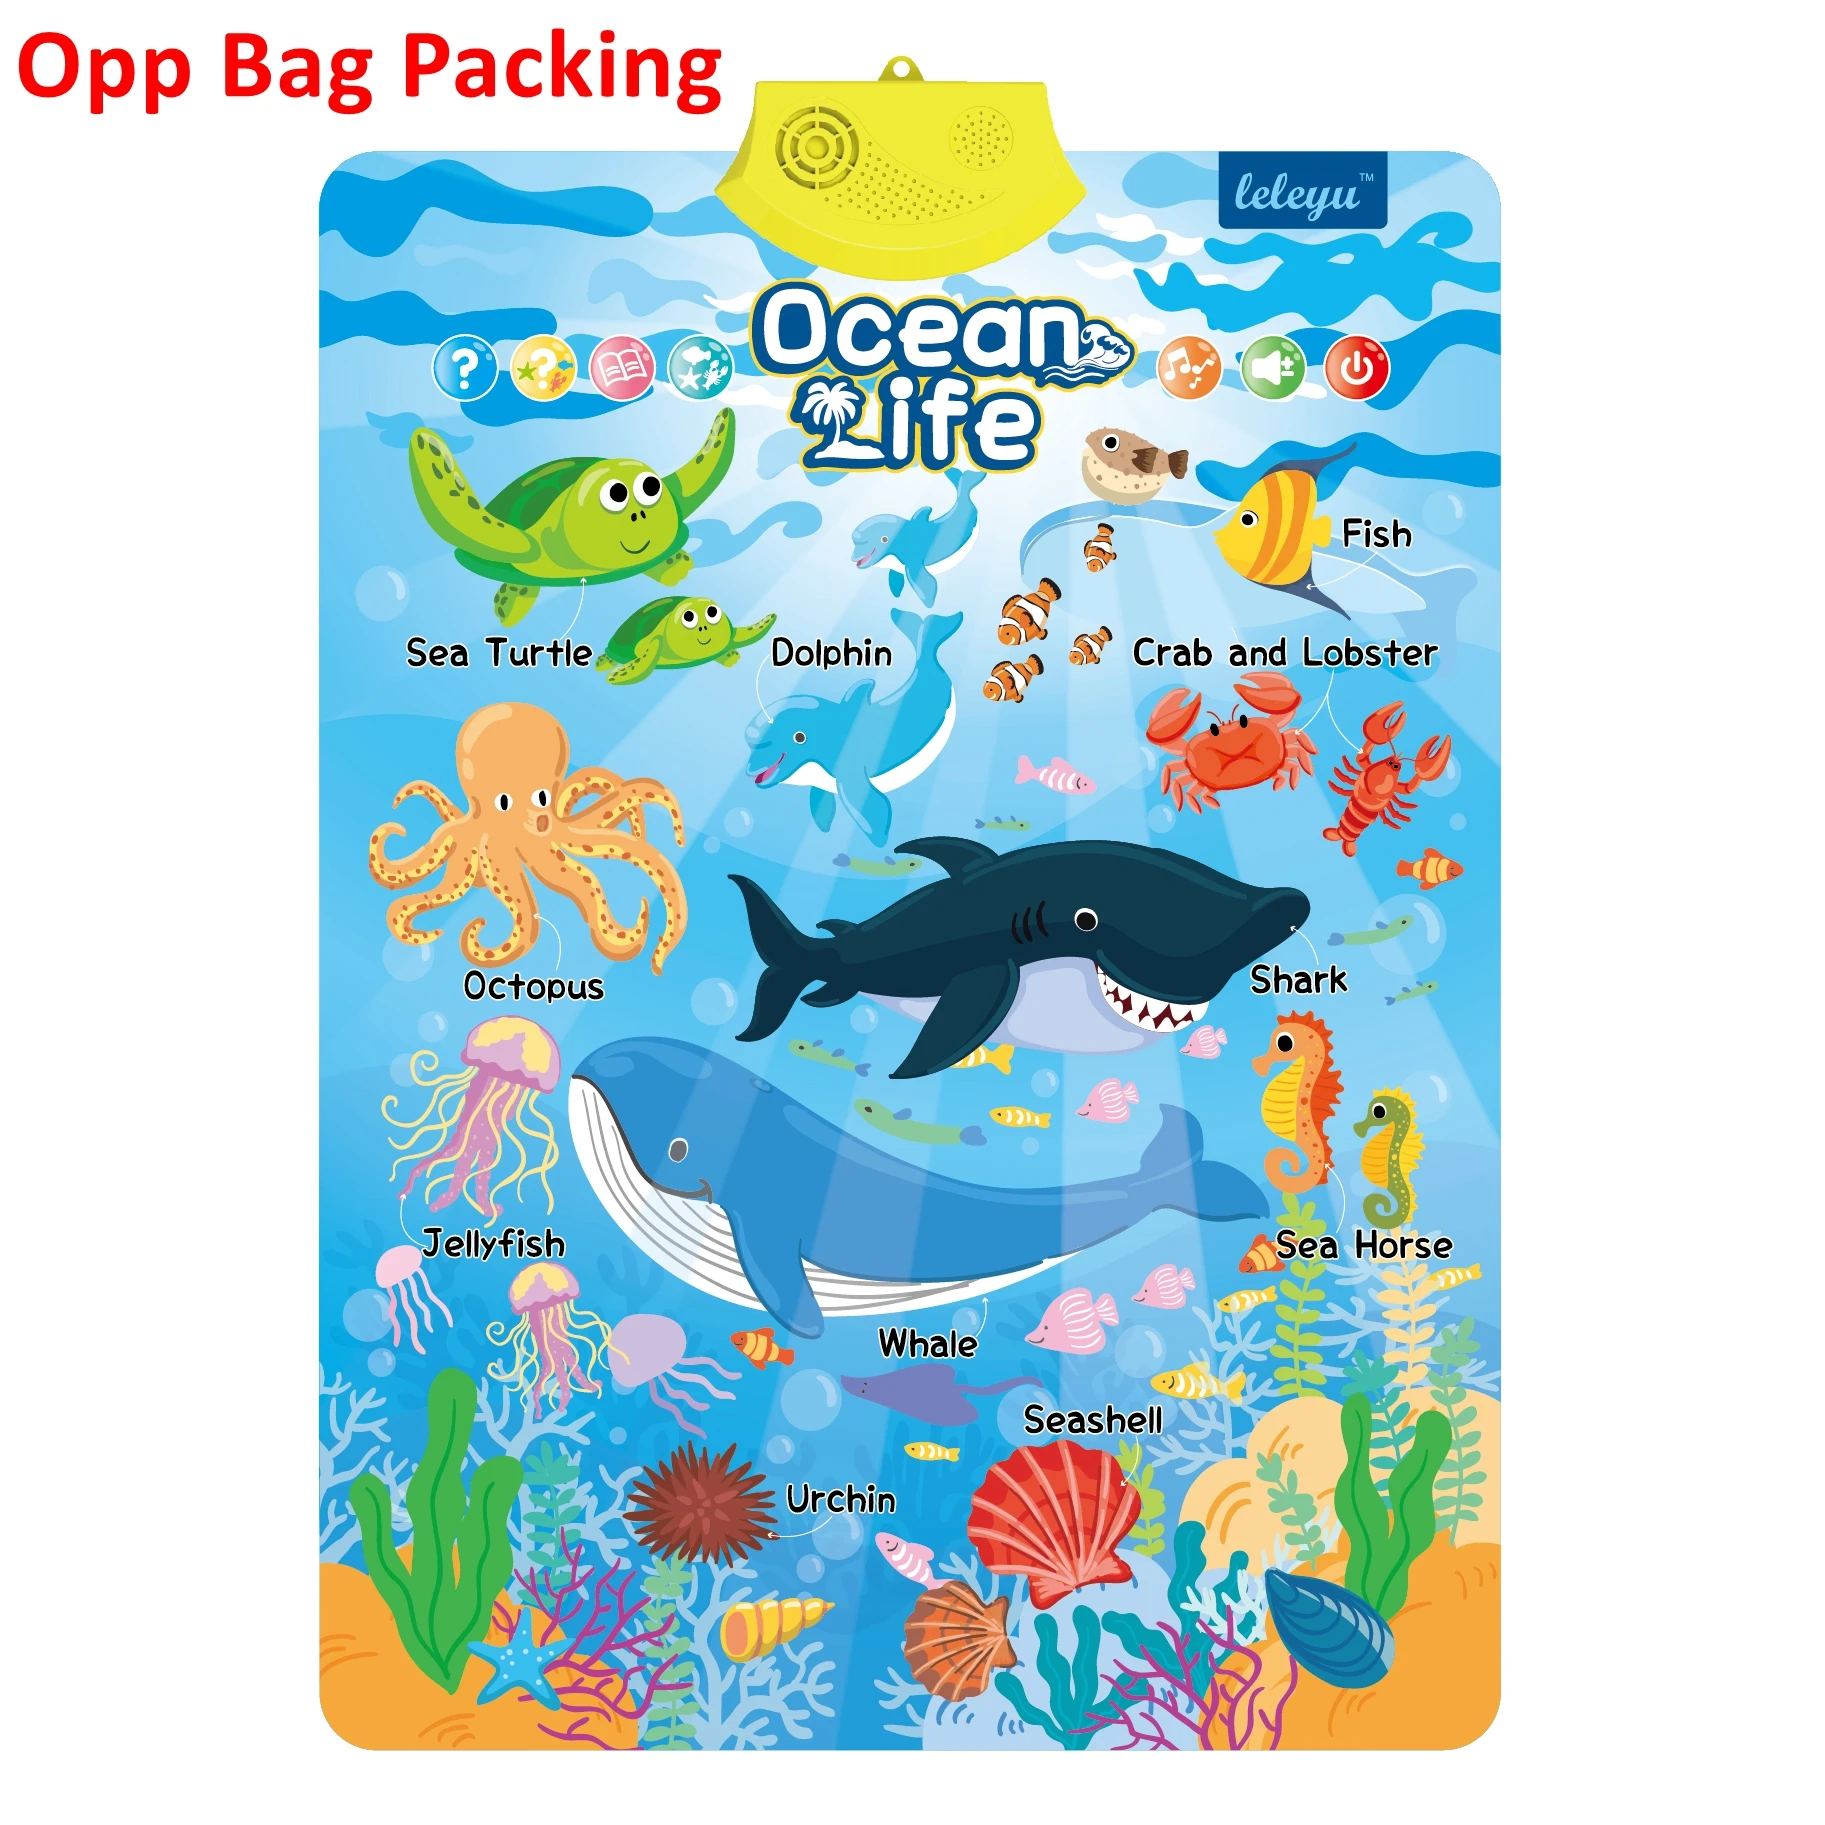 Ag06-2 Ocean Animals Talking Poster Marine Life Chart Fun Facts Of Each  Animal In The Sea Funny Game To Find Sea Animals Toy - Buy Ocean Animals  Poster,Marine Life Chart,Talking Poster Product